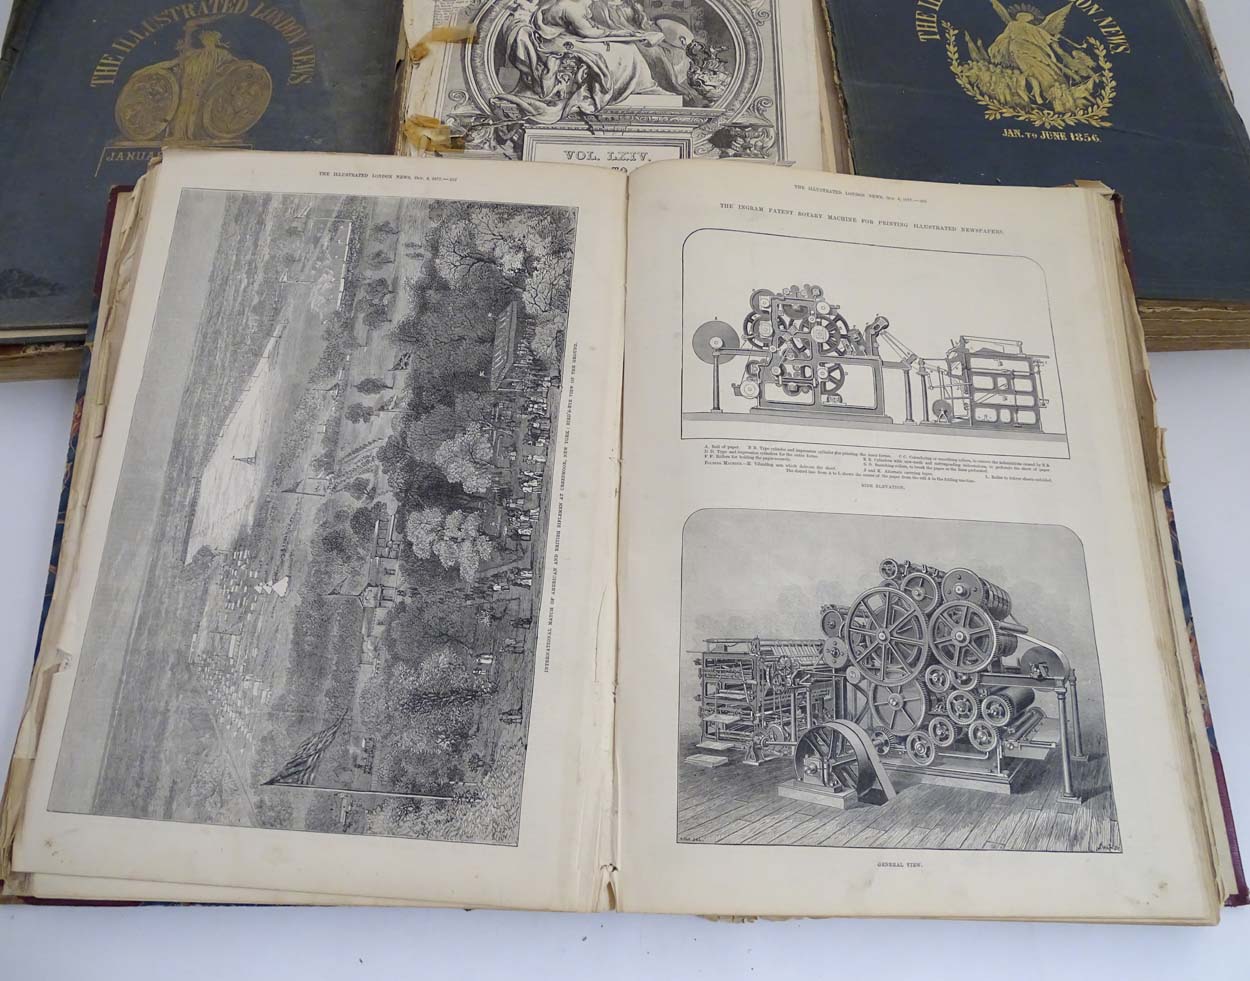 The Illustrated London News: 5 volumes of The Illustrated London News comprising: Volume I: May - Image 4 of 8